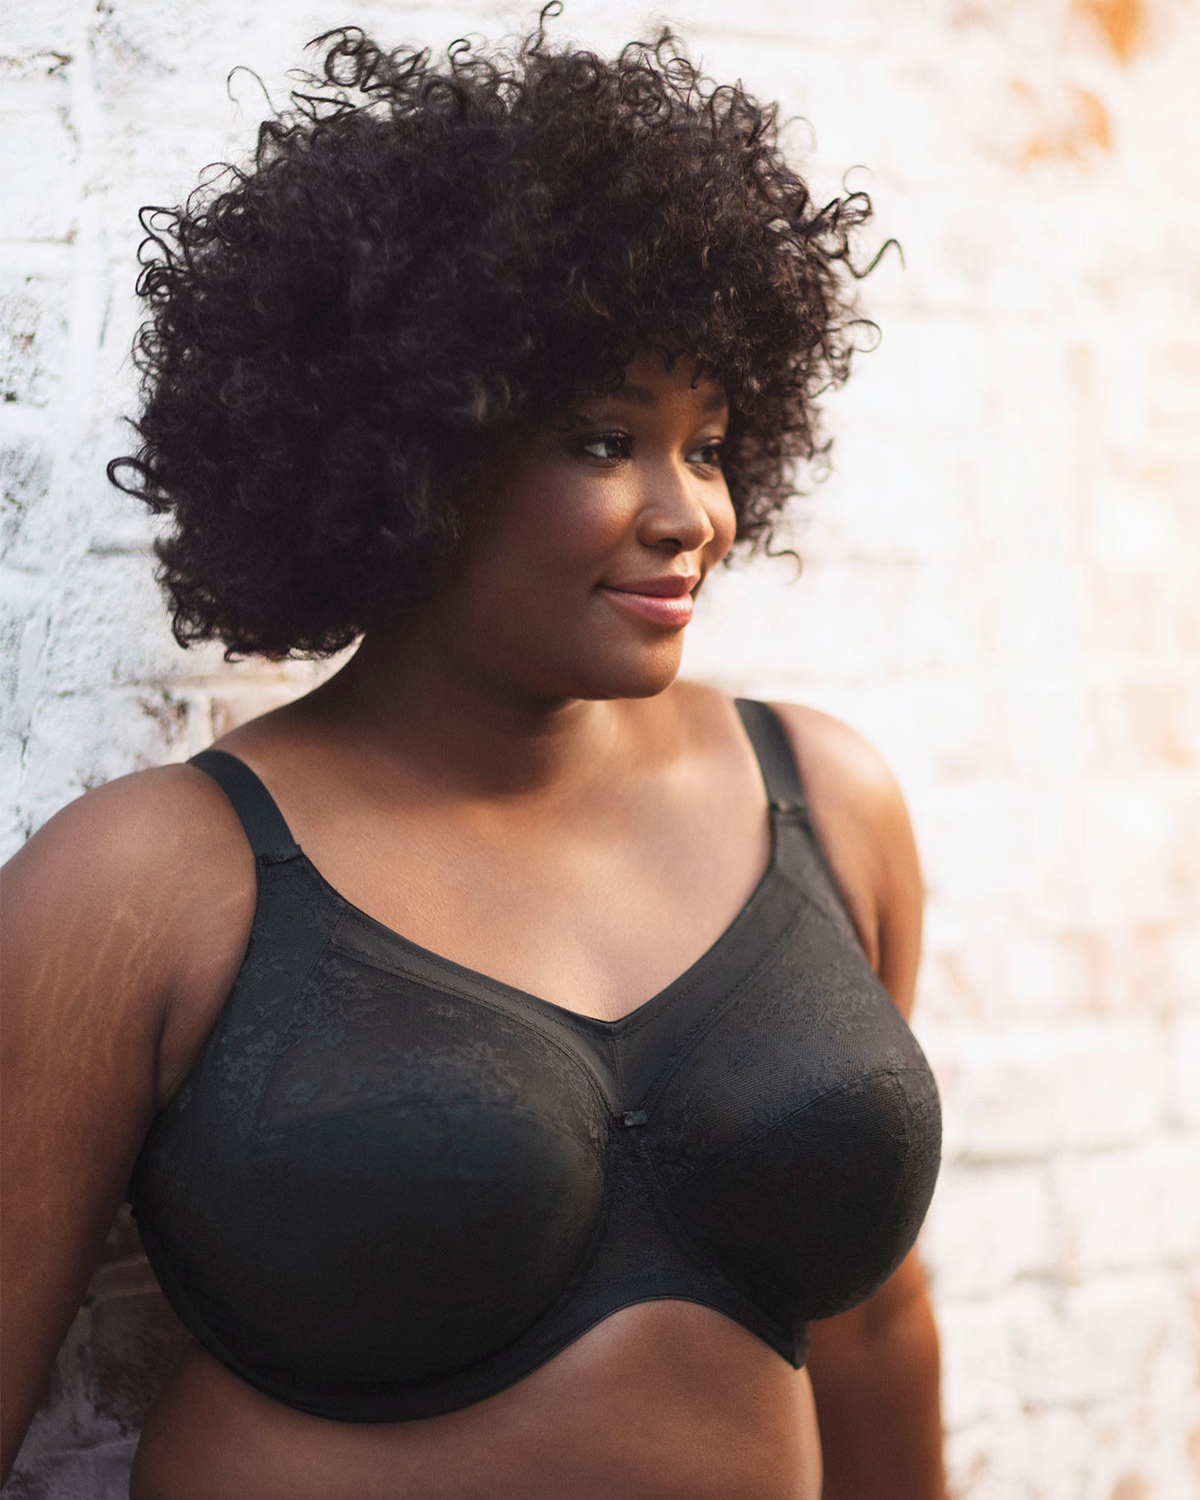 Model wearing a cut and sew full cup banded underwire bra in black